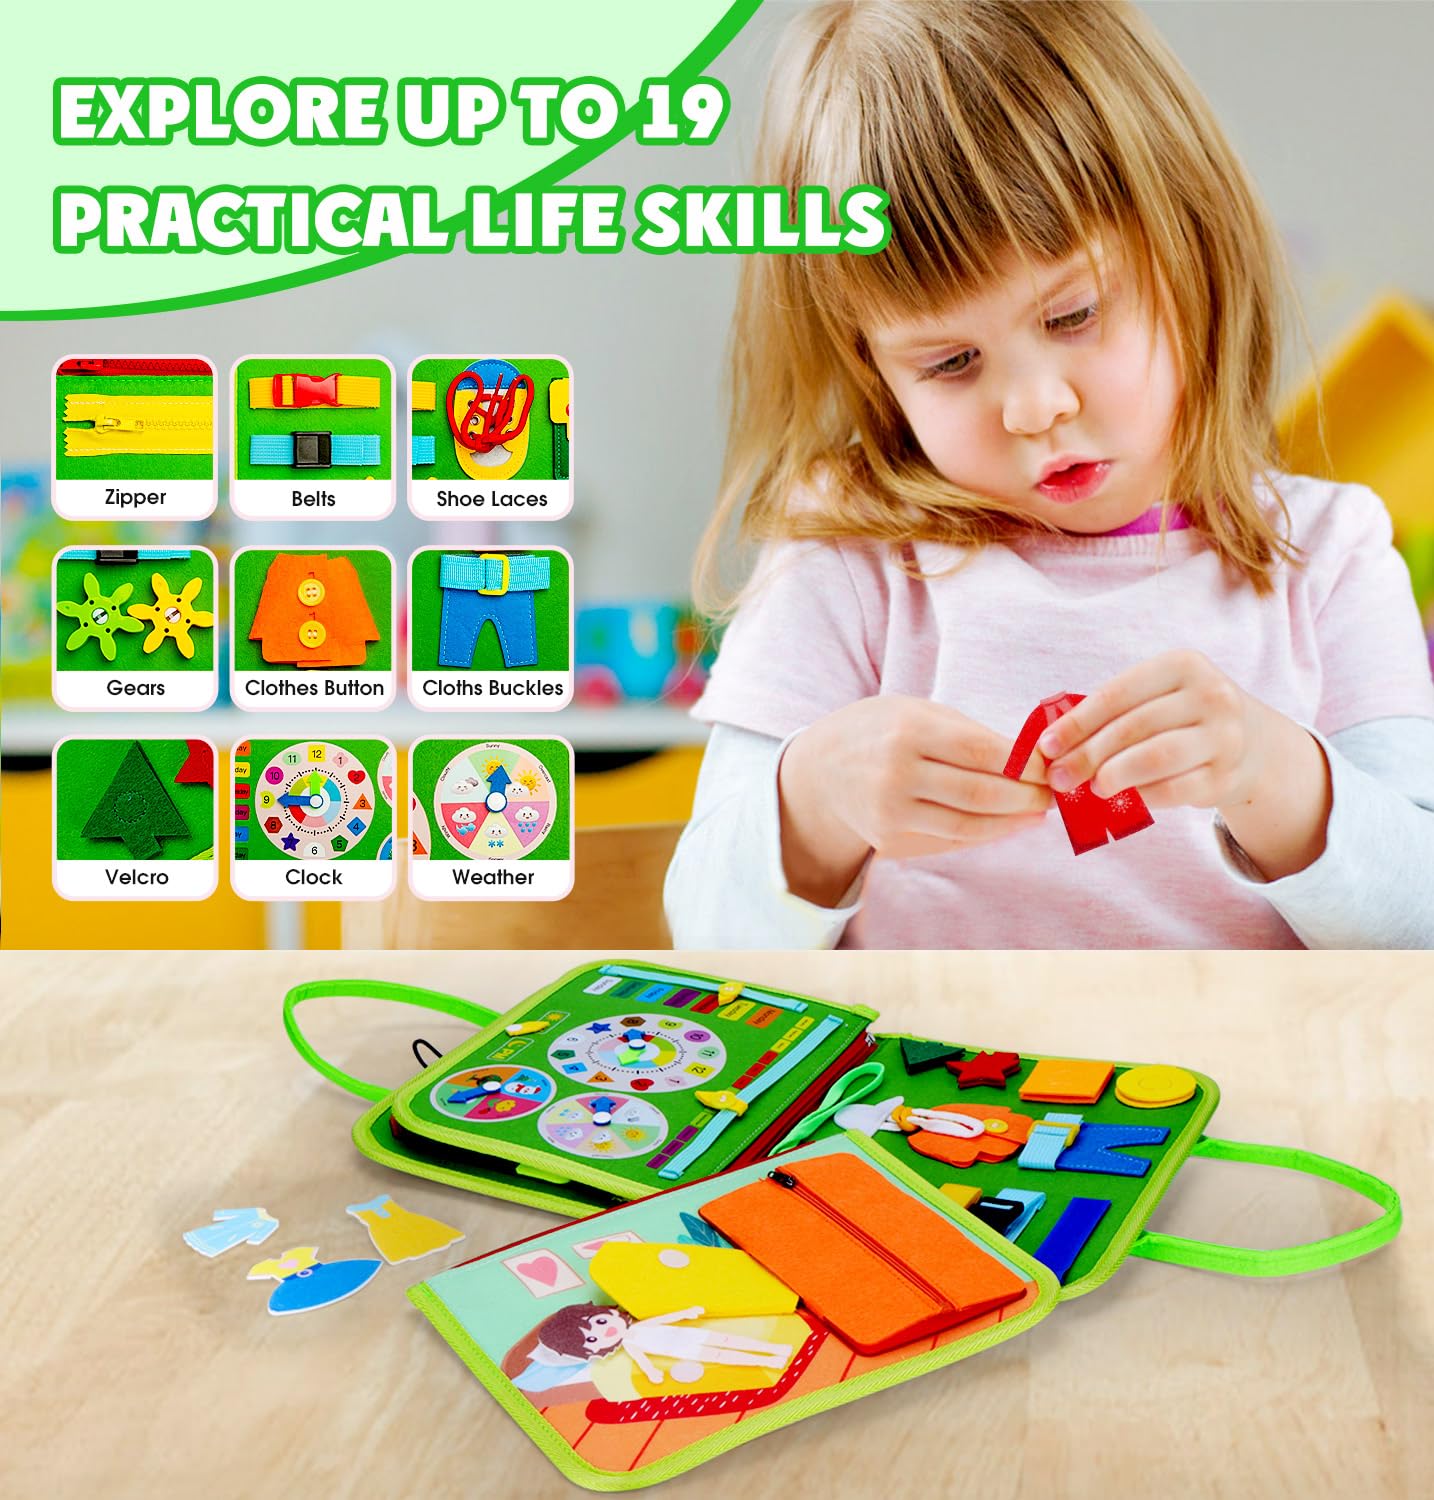 Guolely Busy Board Montessori Toys for 1-6 Years Old - Toddler Travel Toys, Educational Busy Book with 10 Pages Soft Daily Learning Activities - Sensory Toy Gift Ideal for Boys, Girls, Kids